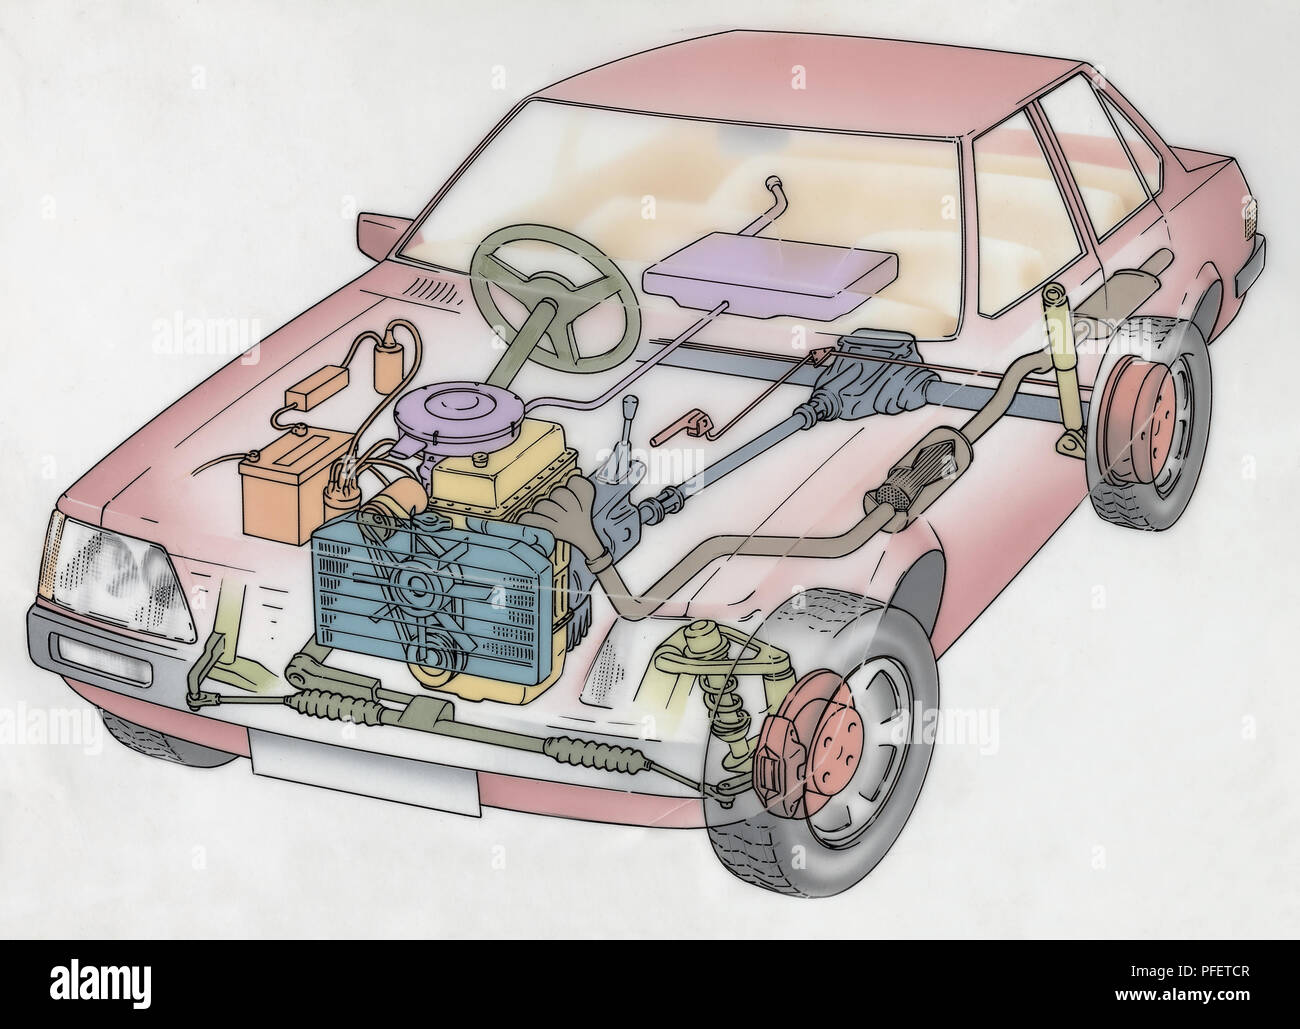 Artwork cross-section diagram of a car showing the engine, radiator, battery, carburettor, drive shaft, suspension, disc brake, exhaust system and fuel tank. Stock Photo